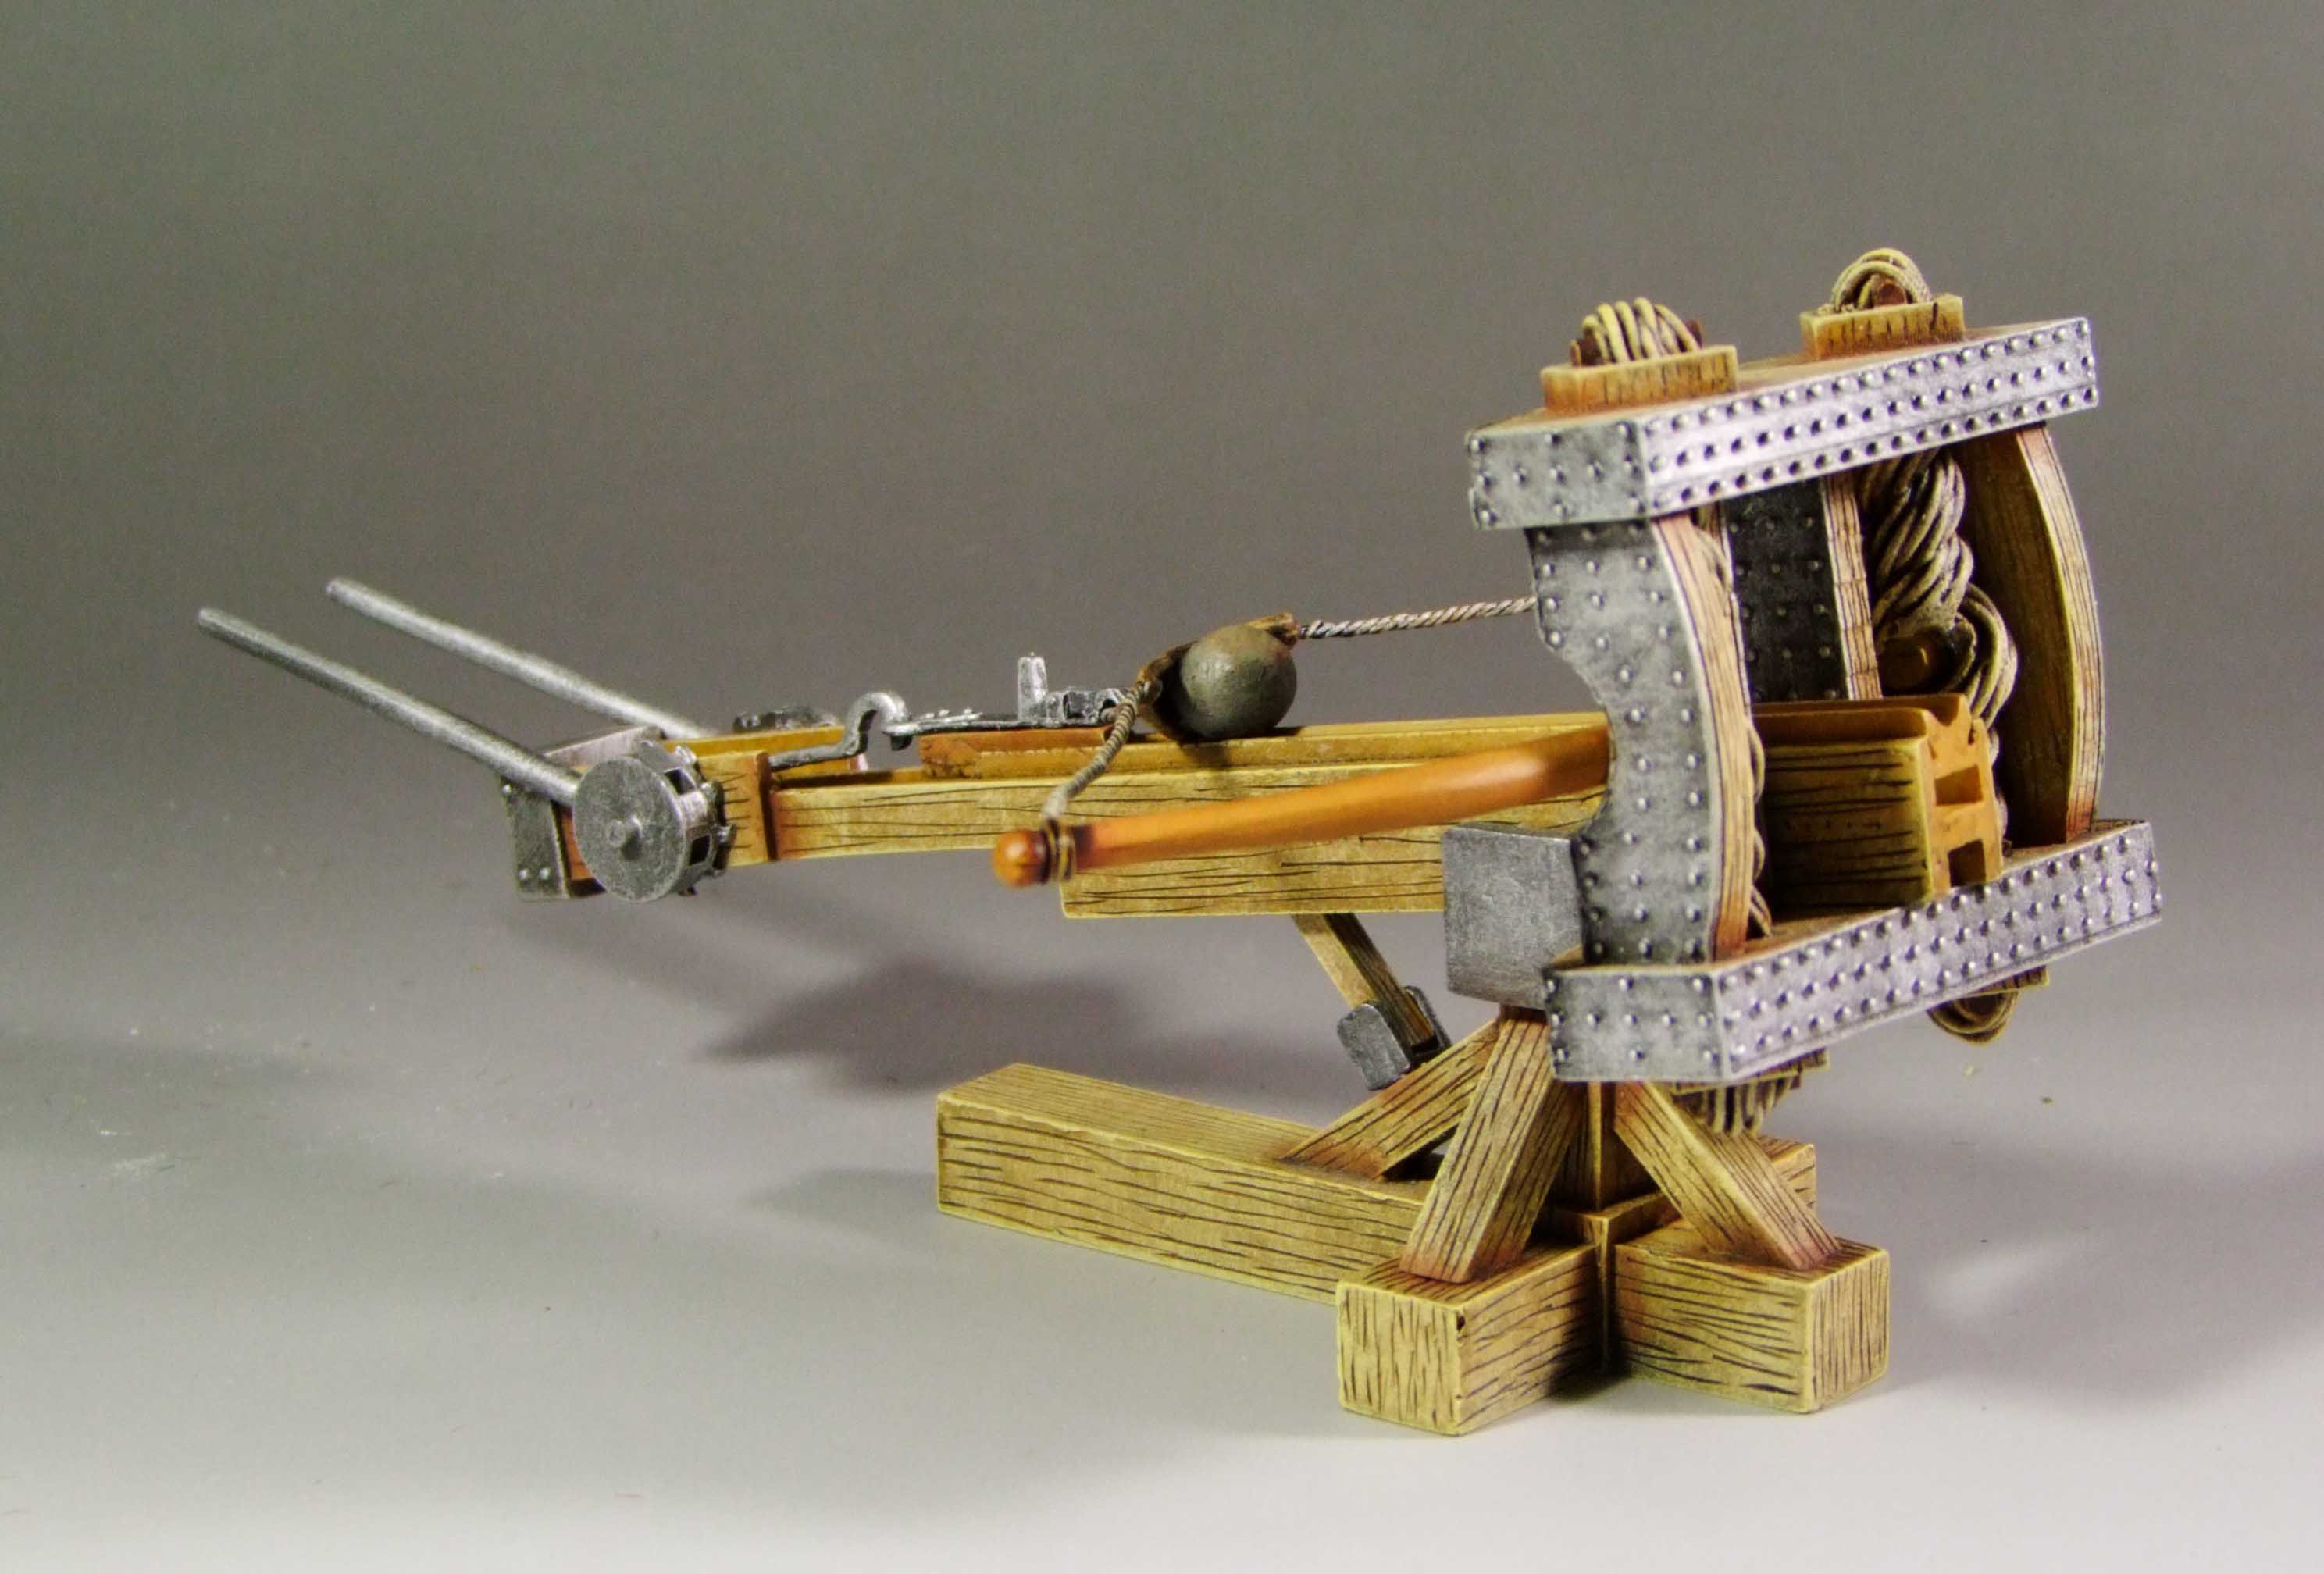 Roman Catapult #1 with soldier